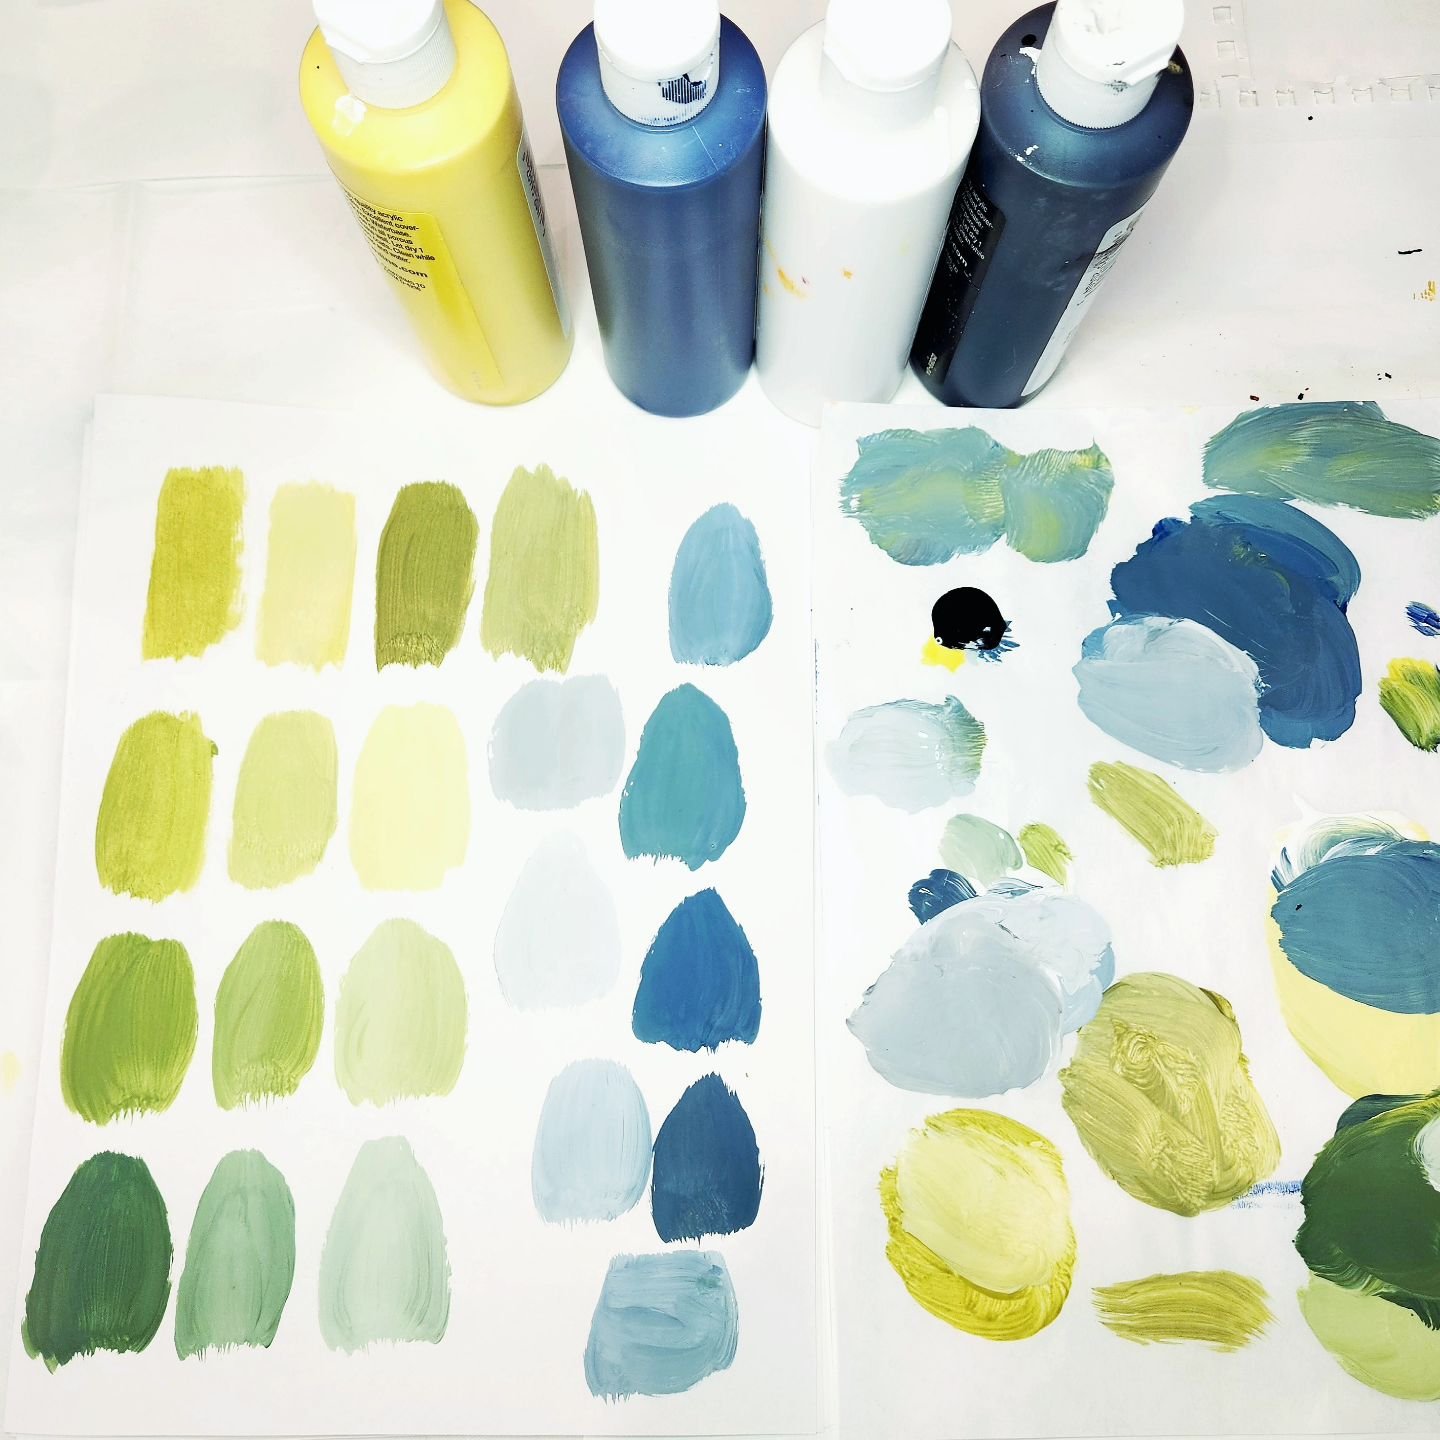 Mixing up a few of my favorite colors. A lot of artists avoid using black in their work, but I find it's the secret ingredient to getting those bright golden greens that match the leaves in my spring garden. Just a touch of blue can change it all up 